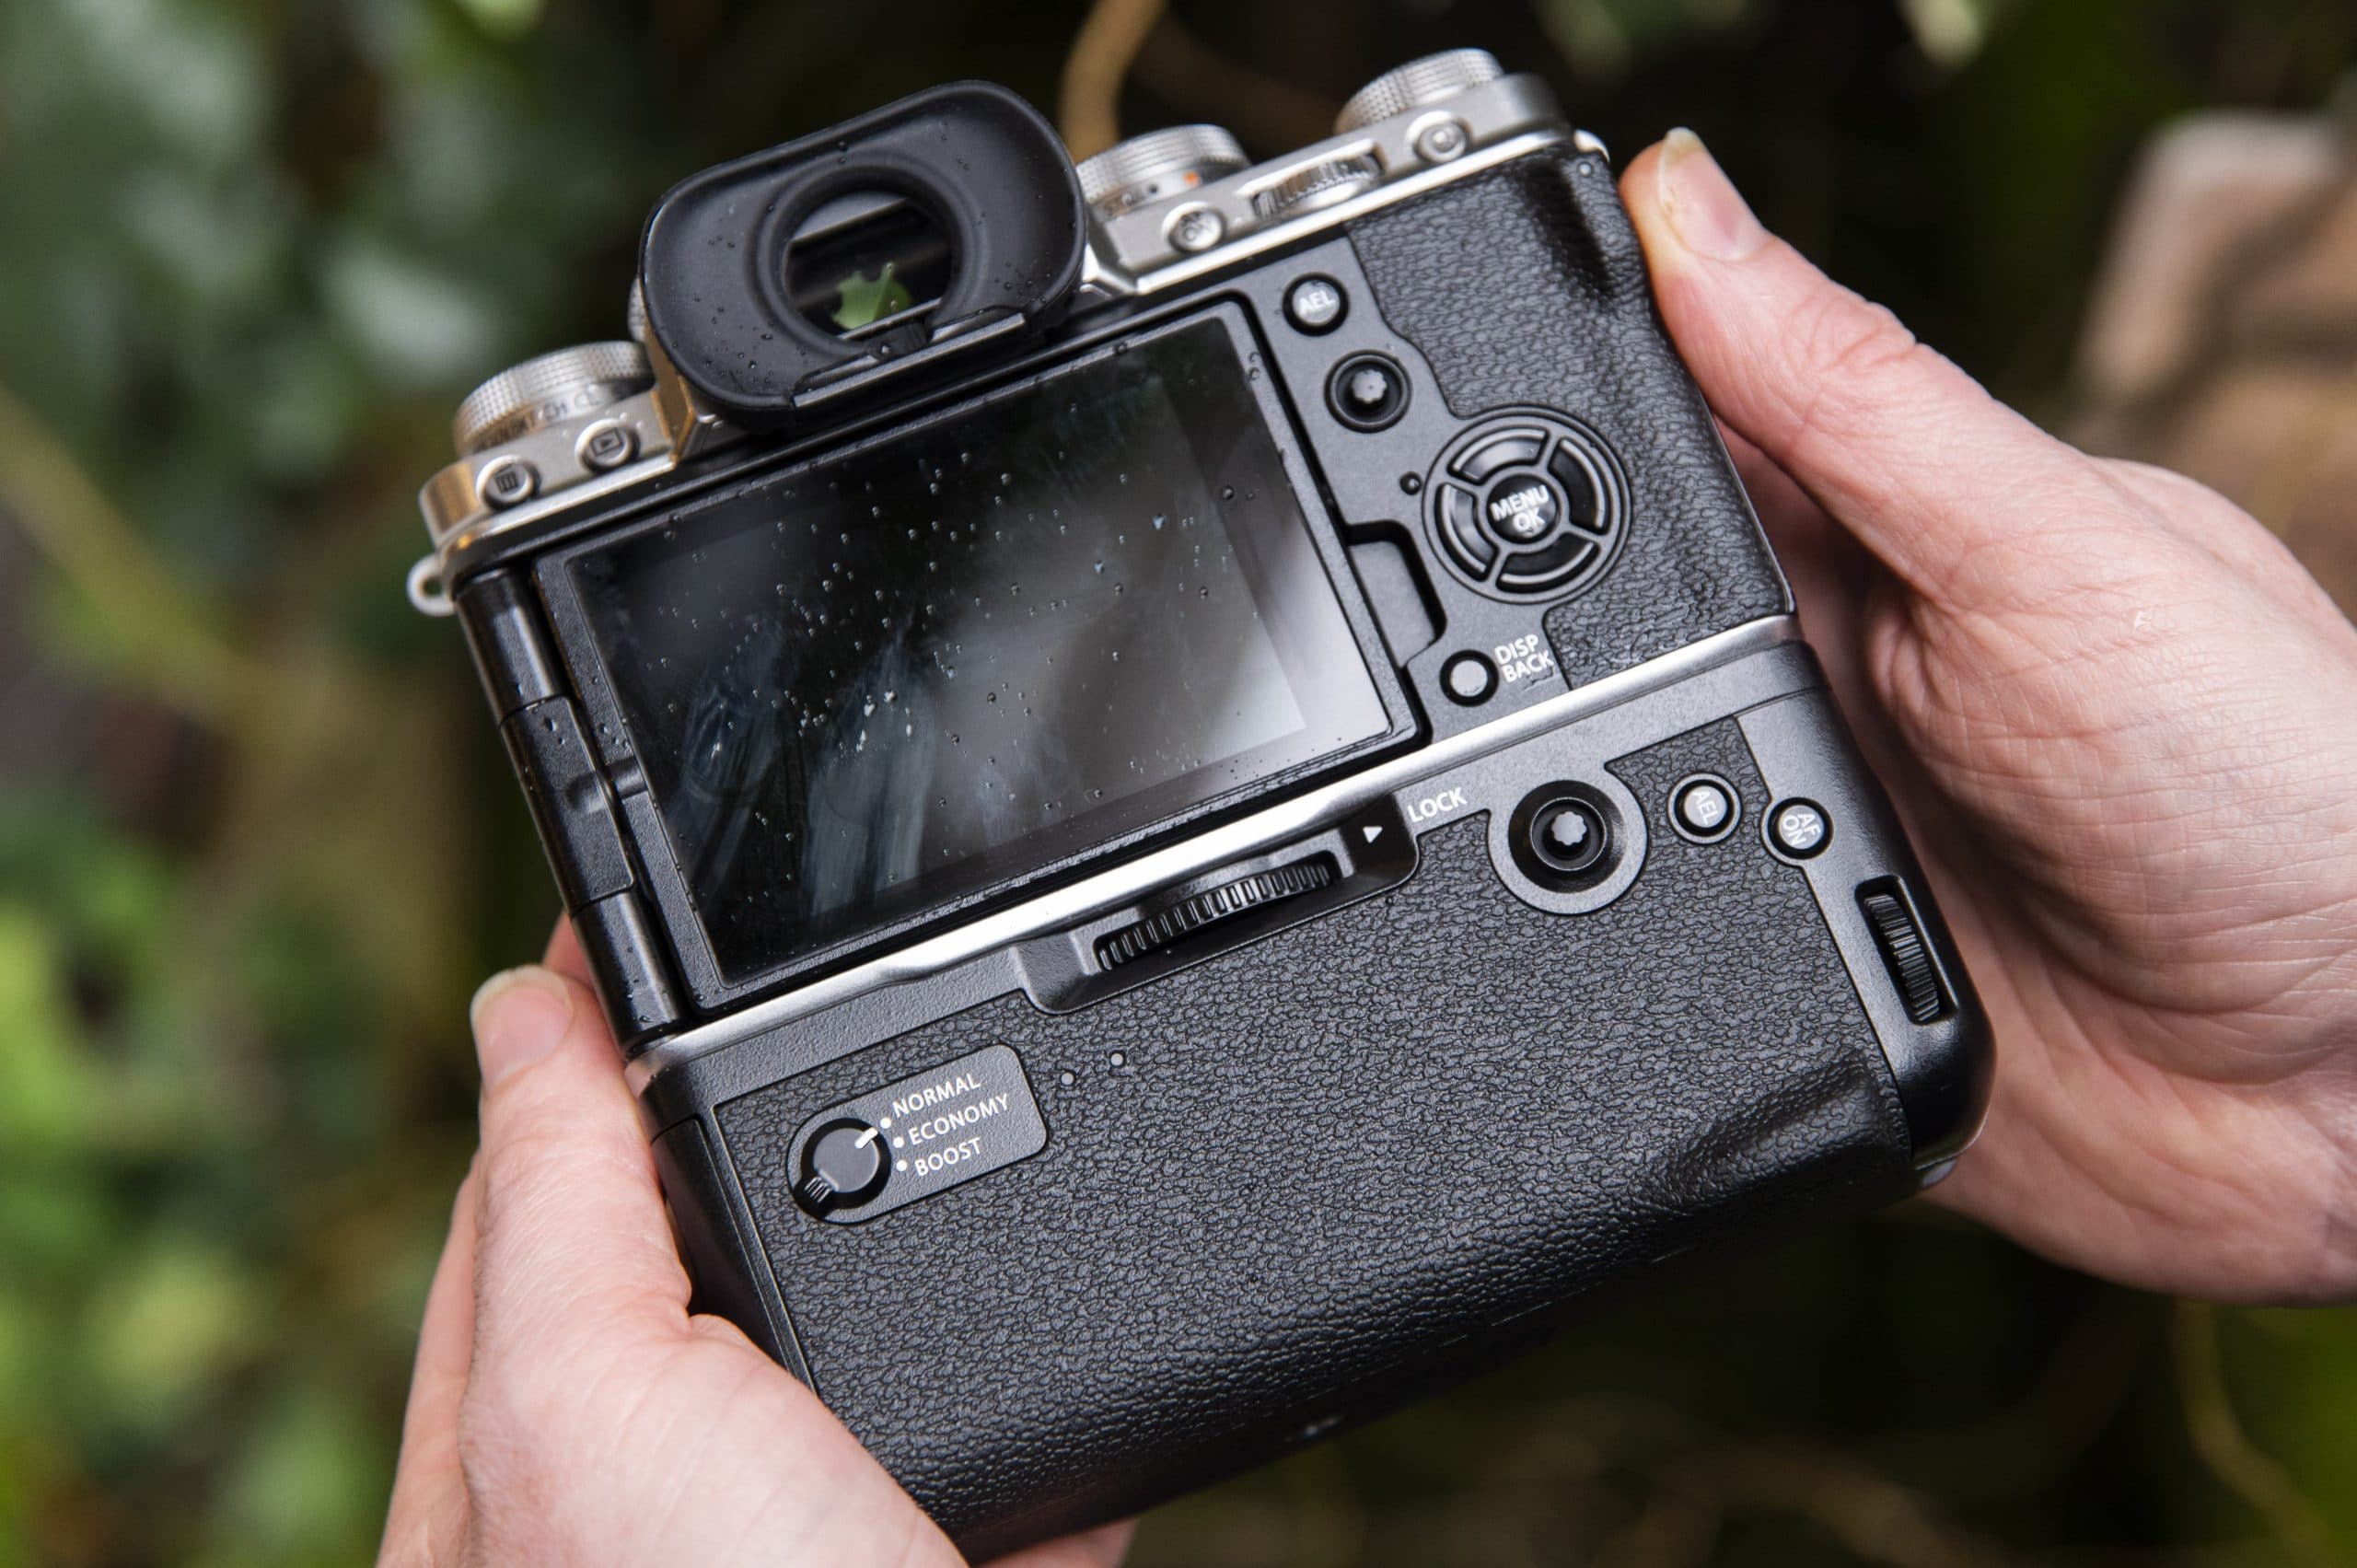 6 Best Fujifilm X-T4 Features That I Love